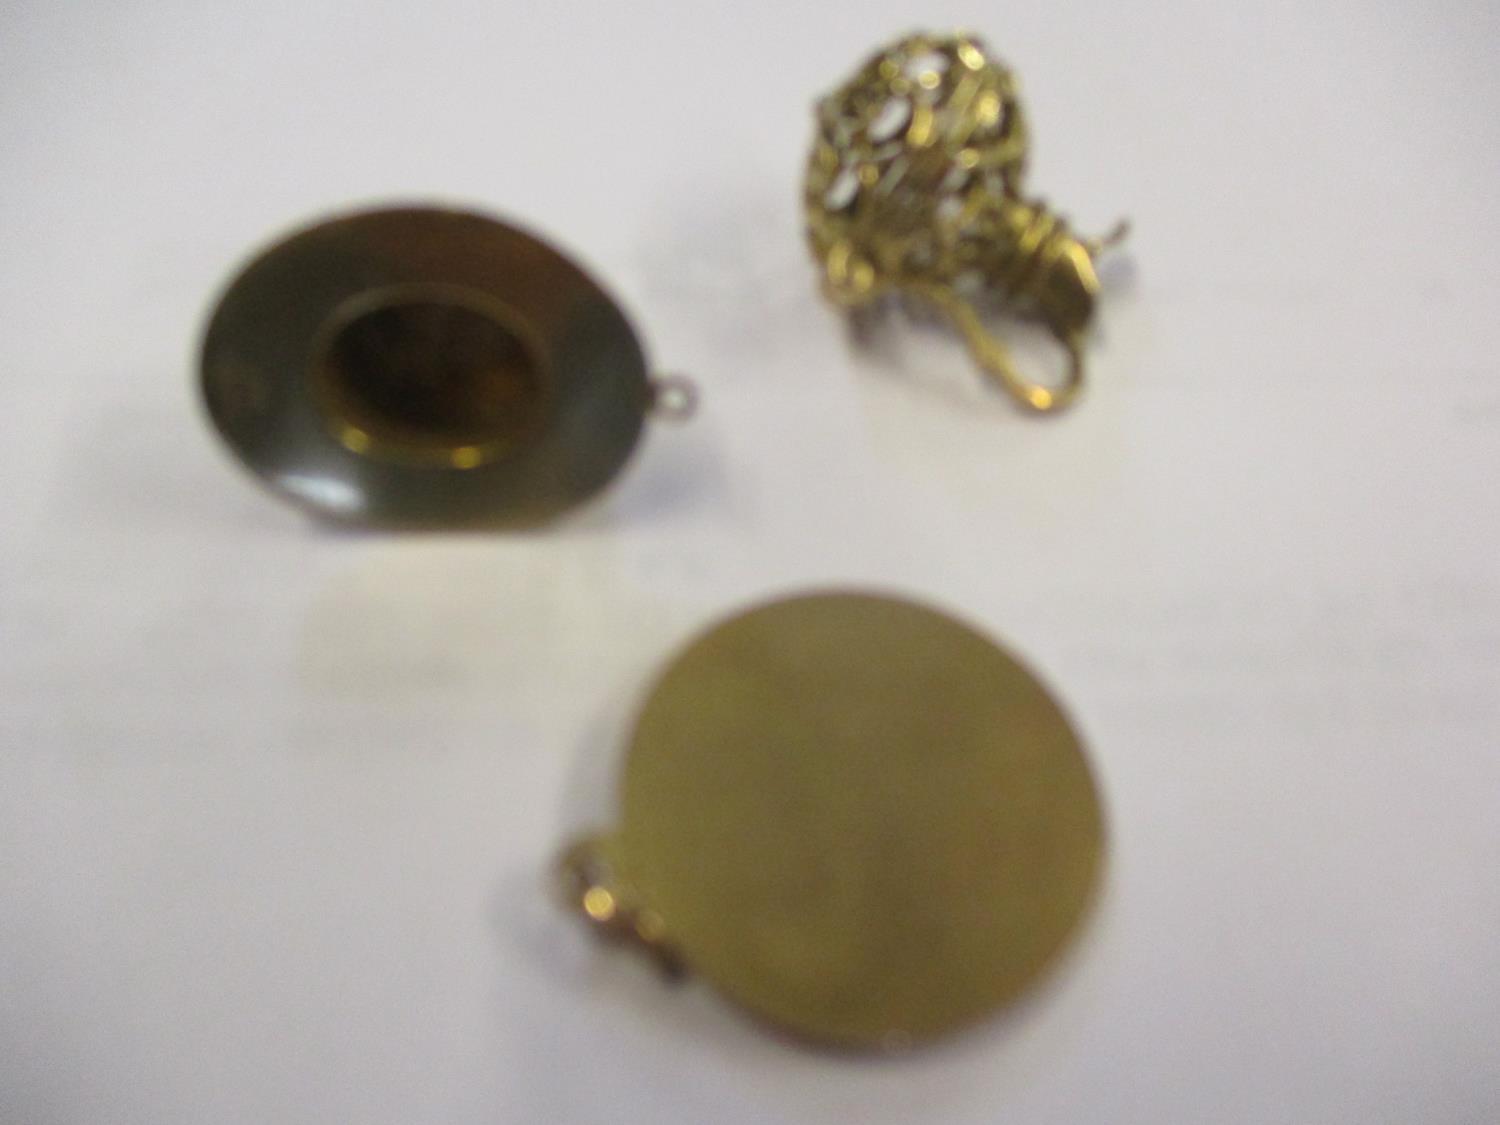 A quantity of 9ct gold jewellery comprising a pendant in the form of a top hat, a pendant with an - Image 2 of 2